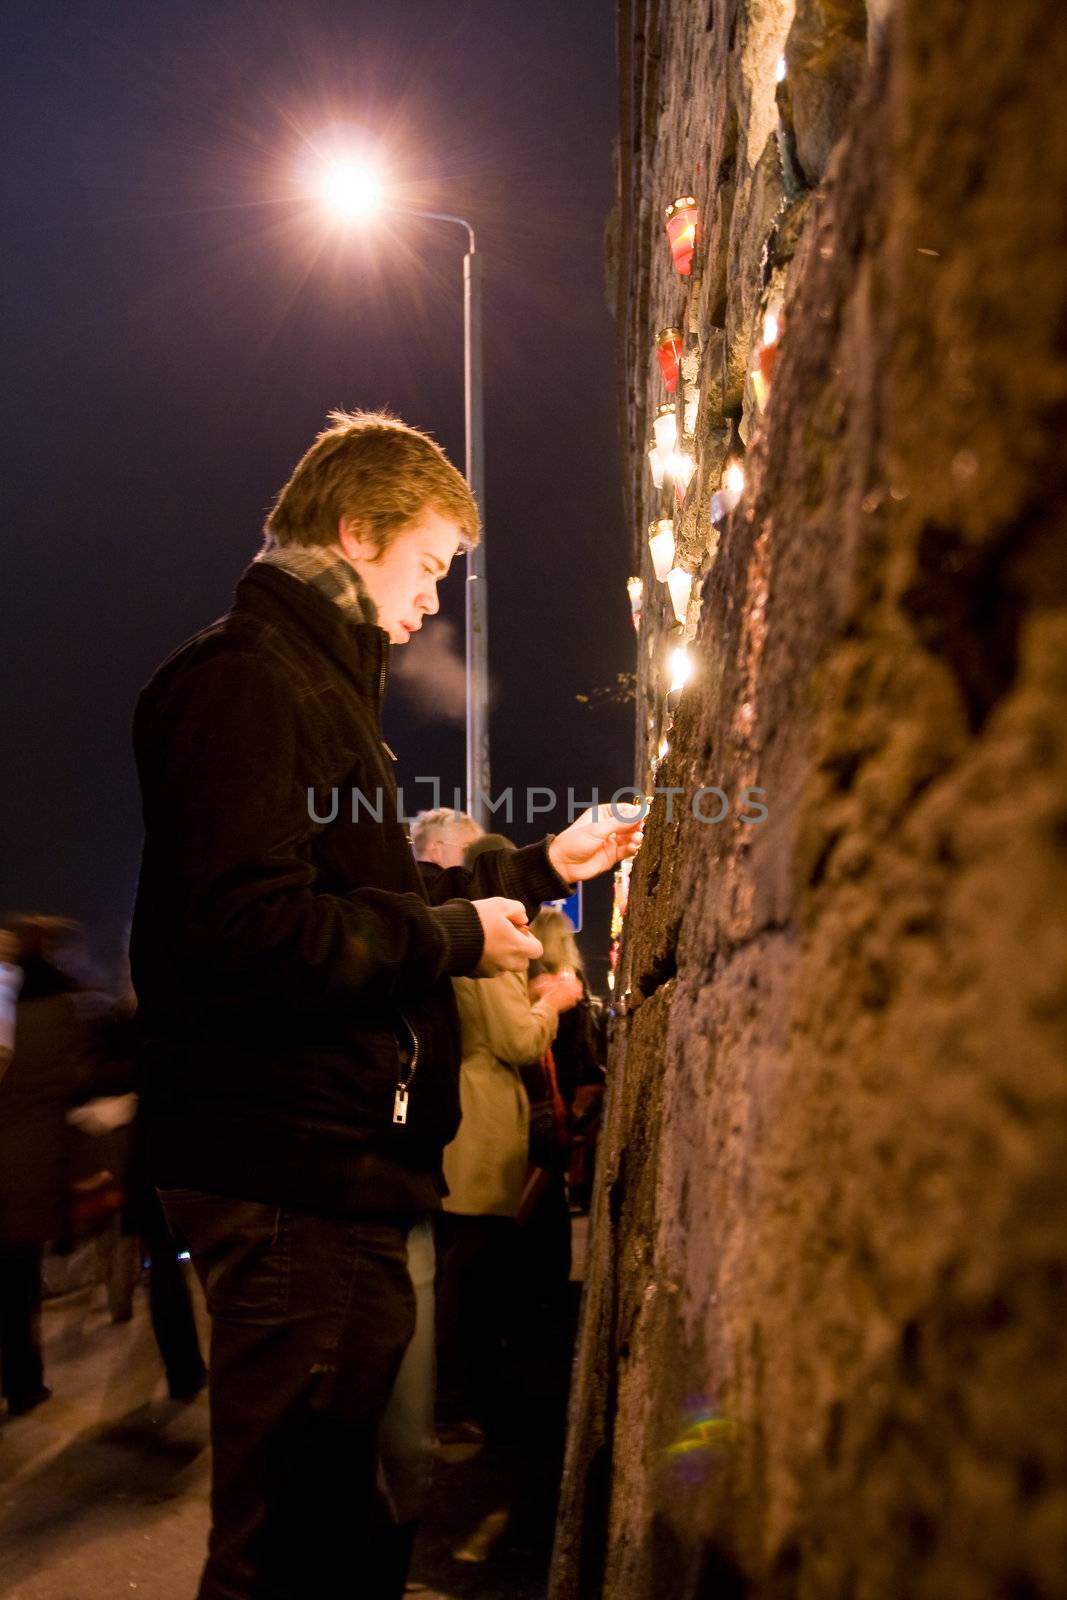 RIGA, LATVIA - NOVEMBER 11: Soldiers Memorial Day. Man lights candle at Prezident's castle wall to commemorate victory over the Russian and German militia. This victory was important in the birth of Latvia as an independent nation. November 11, 2009 in Riga